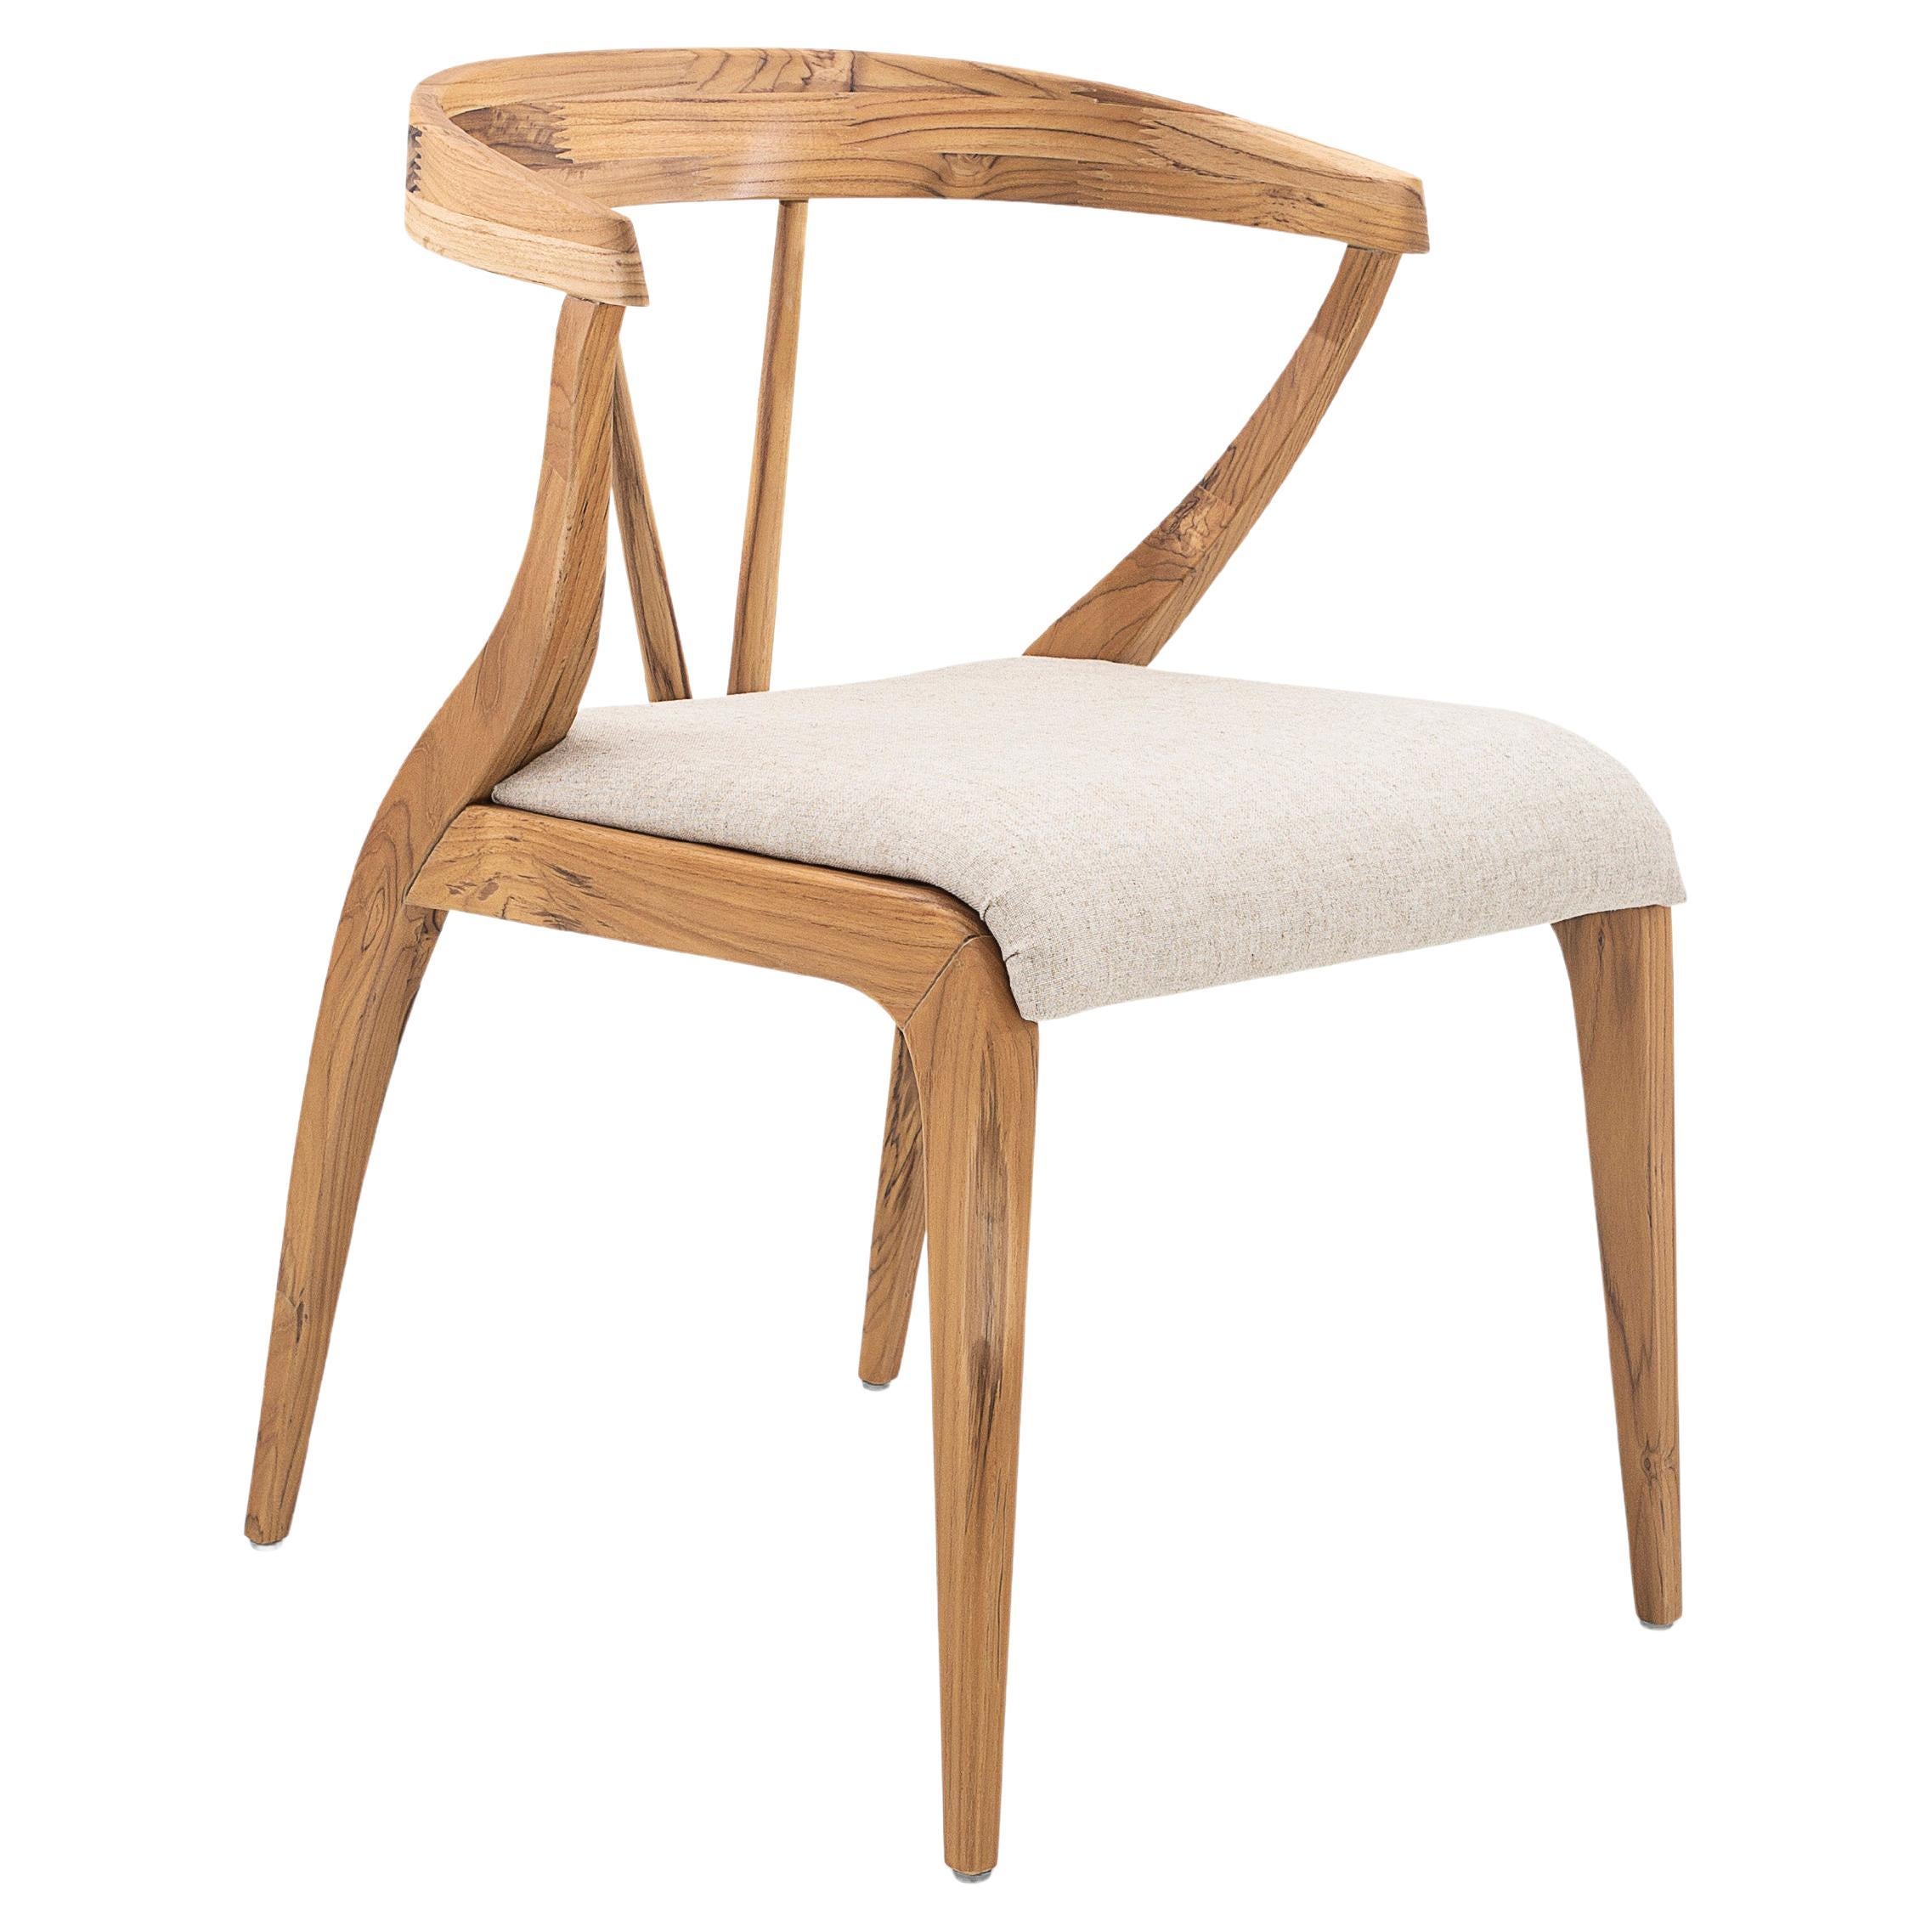 Mat Dining Chair in Teak Wood with Open Back and Ivory Fabric Seat Cushion